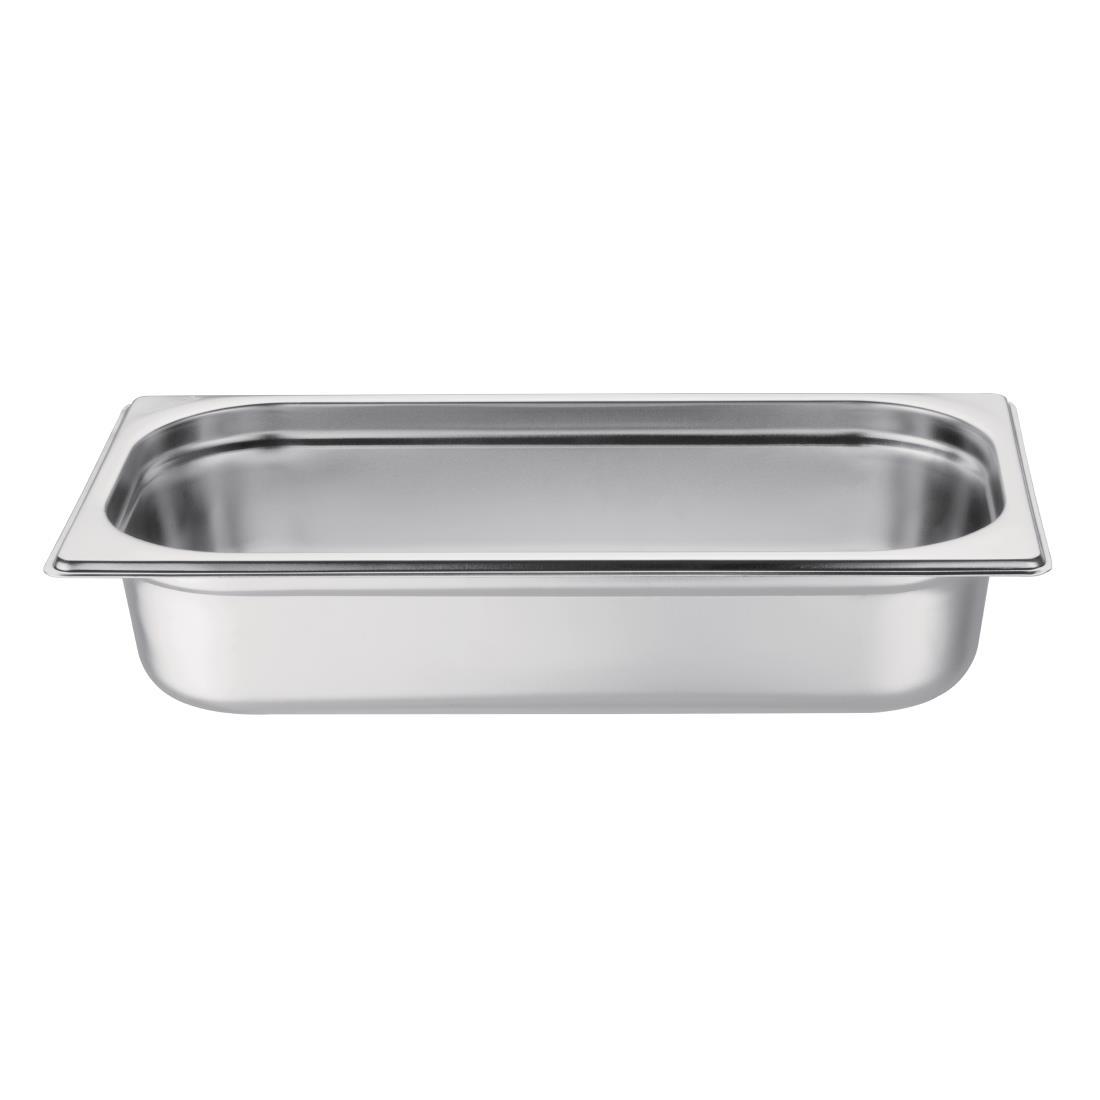 Vogue Stainless Steel 1/3 Gastronorm Pan 65mm - K929  - 2